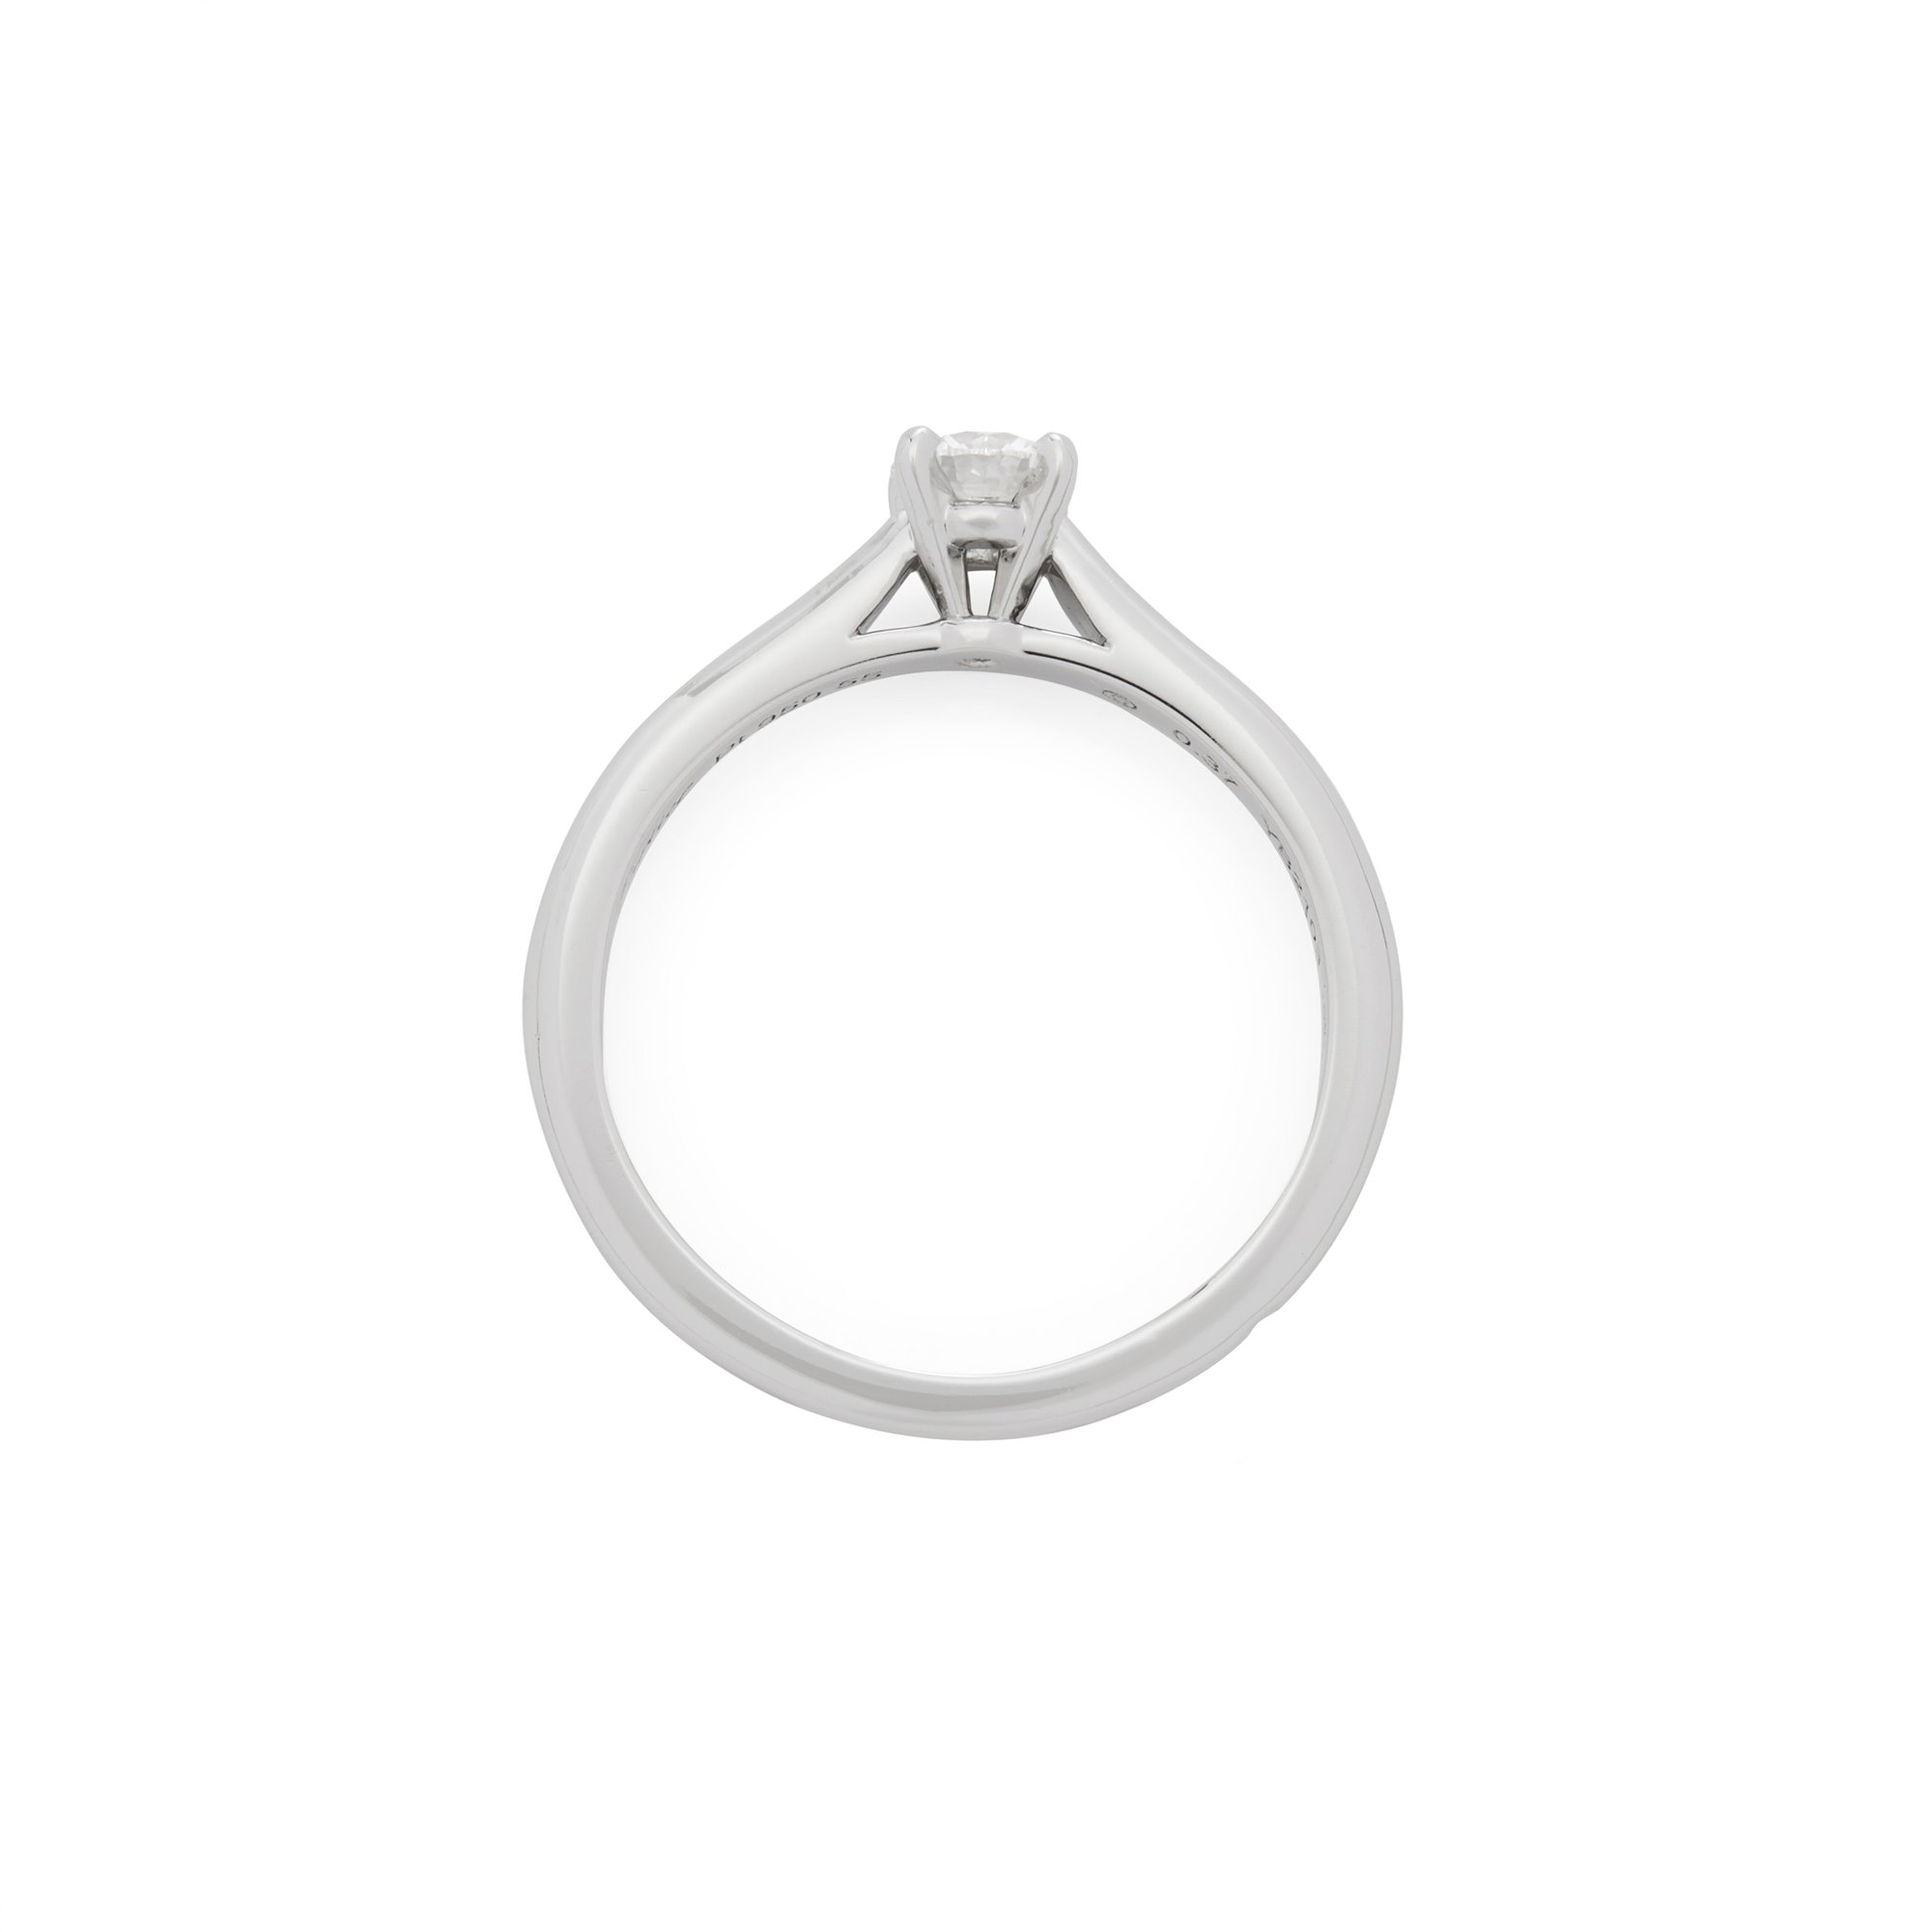 Cartier 0.37ct Diamond Solitaire 1895 Ring